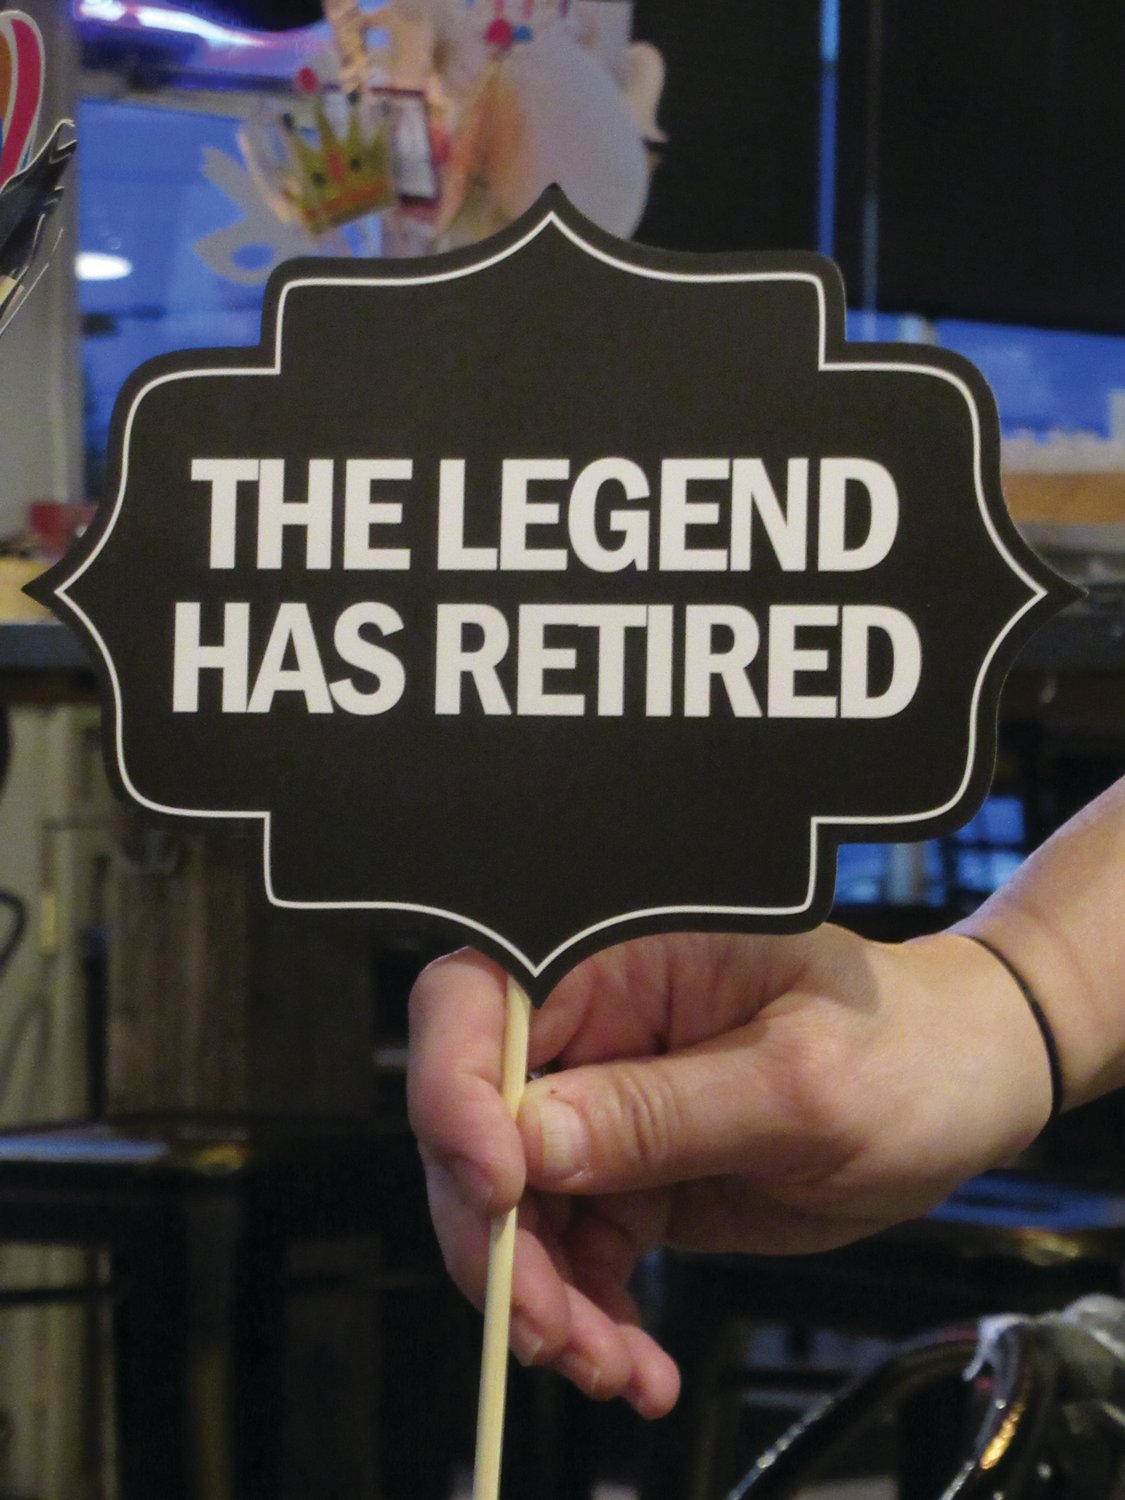 THE LEGEND: “The legend has retired,” read a decoration on countless cupcakes made by Lucia Conti at her husband-owned Emilio’s Bakery in West Warwick. There was another special slogan — “Retired